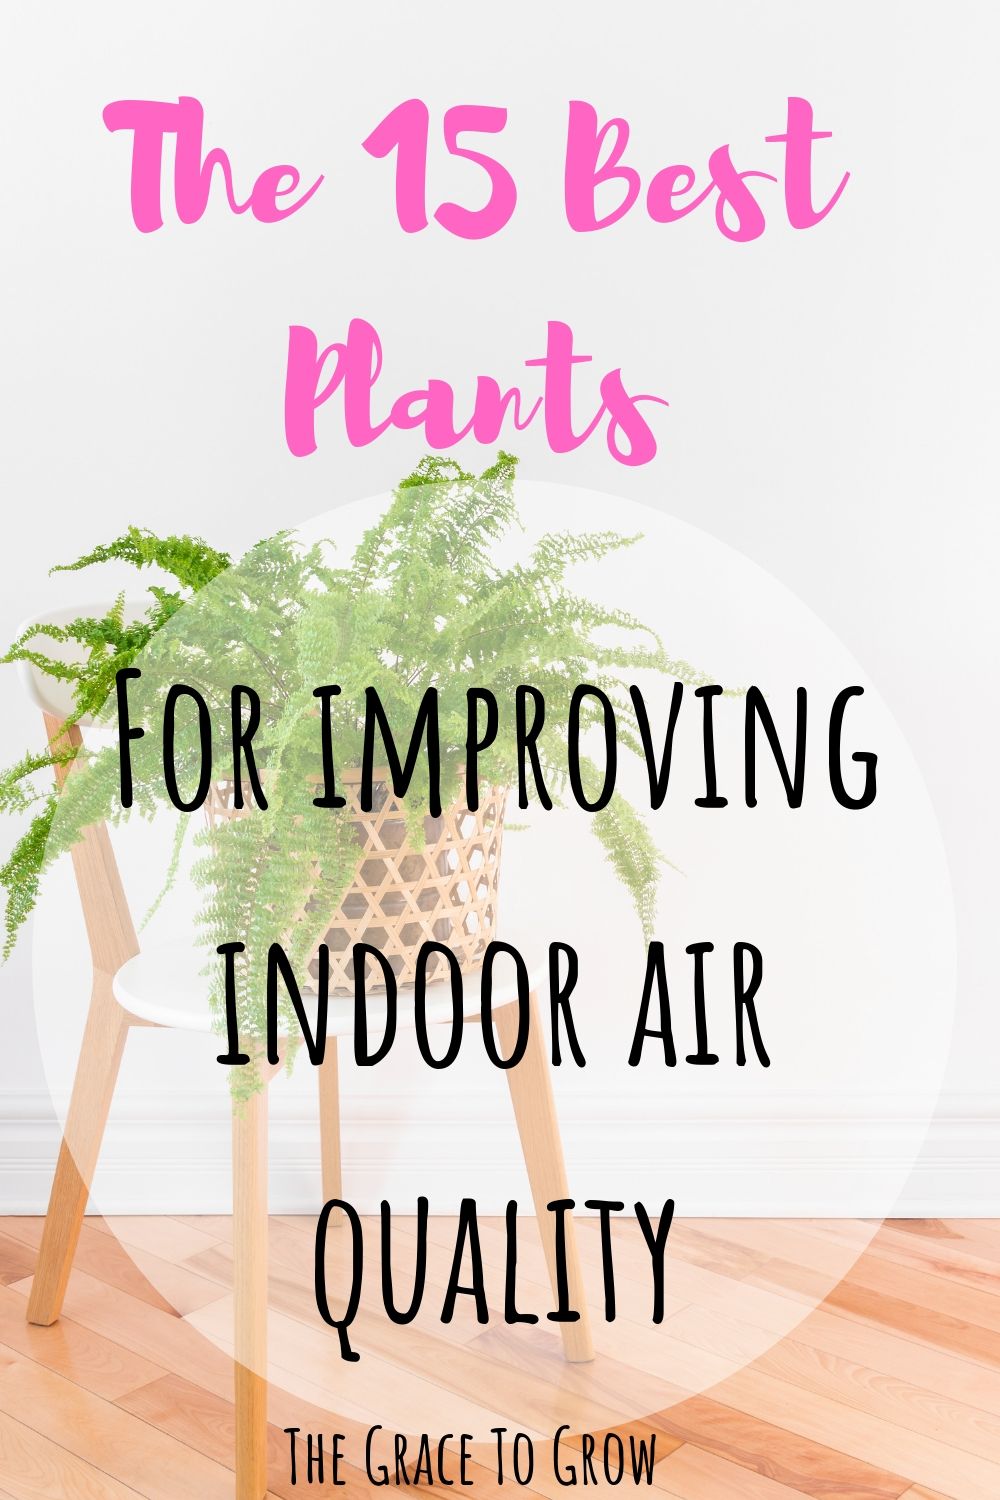 plants-for-improving-indoor-air-quality-pinterest-pin-with-boston-fern